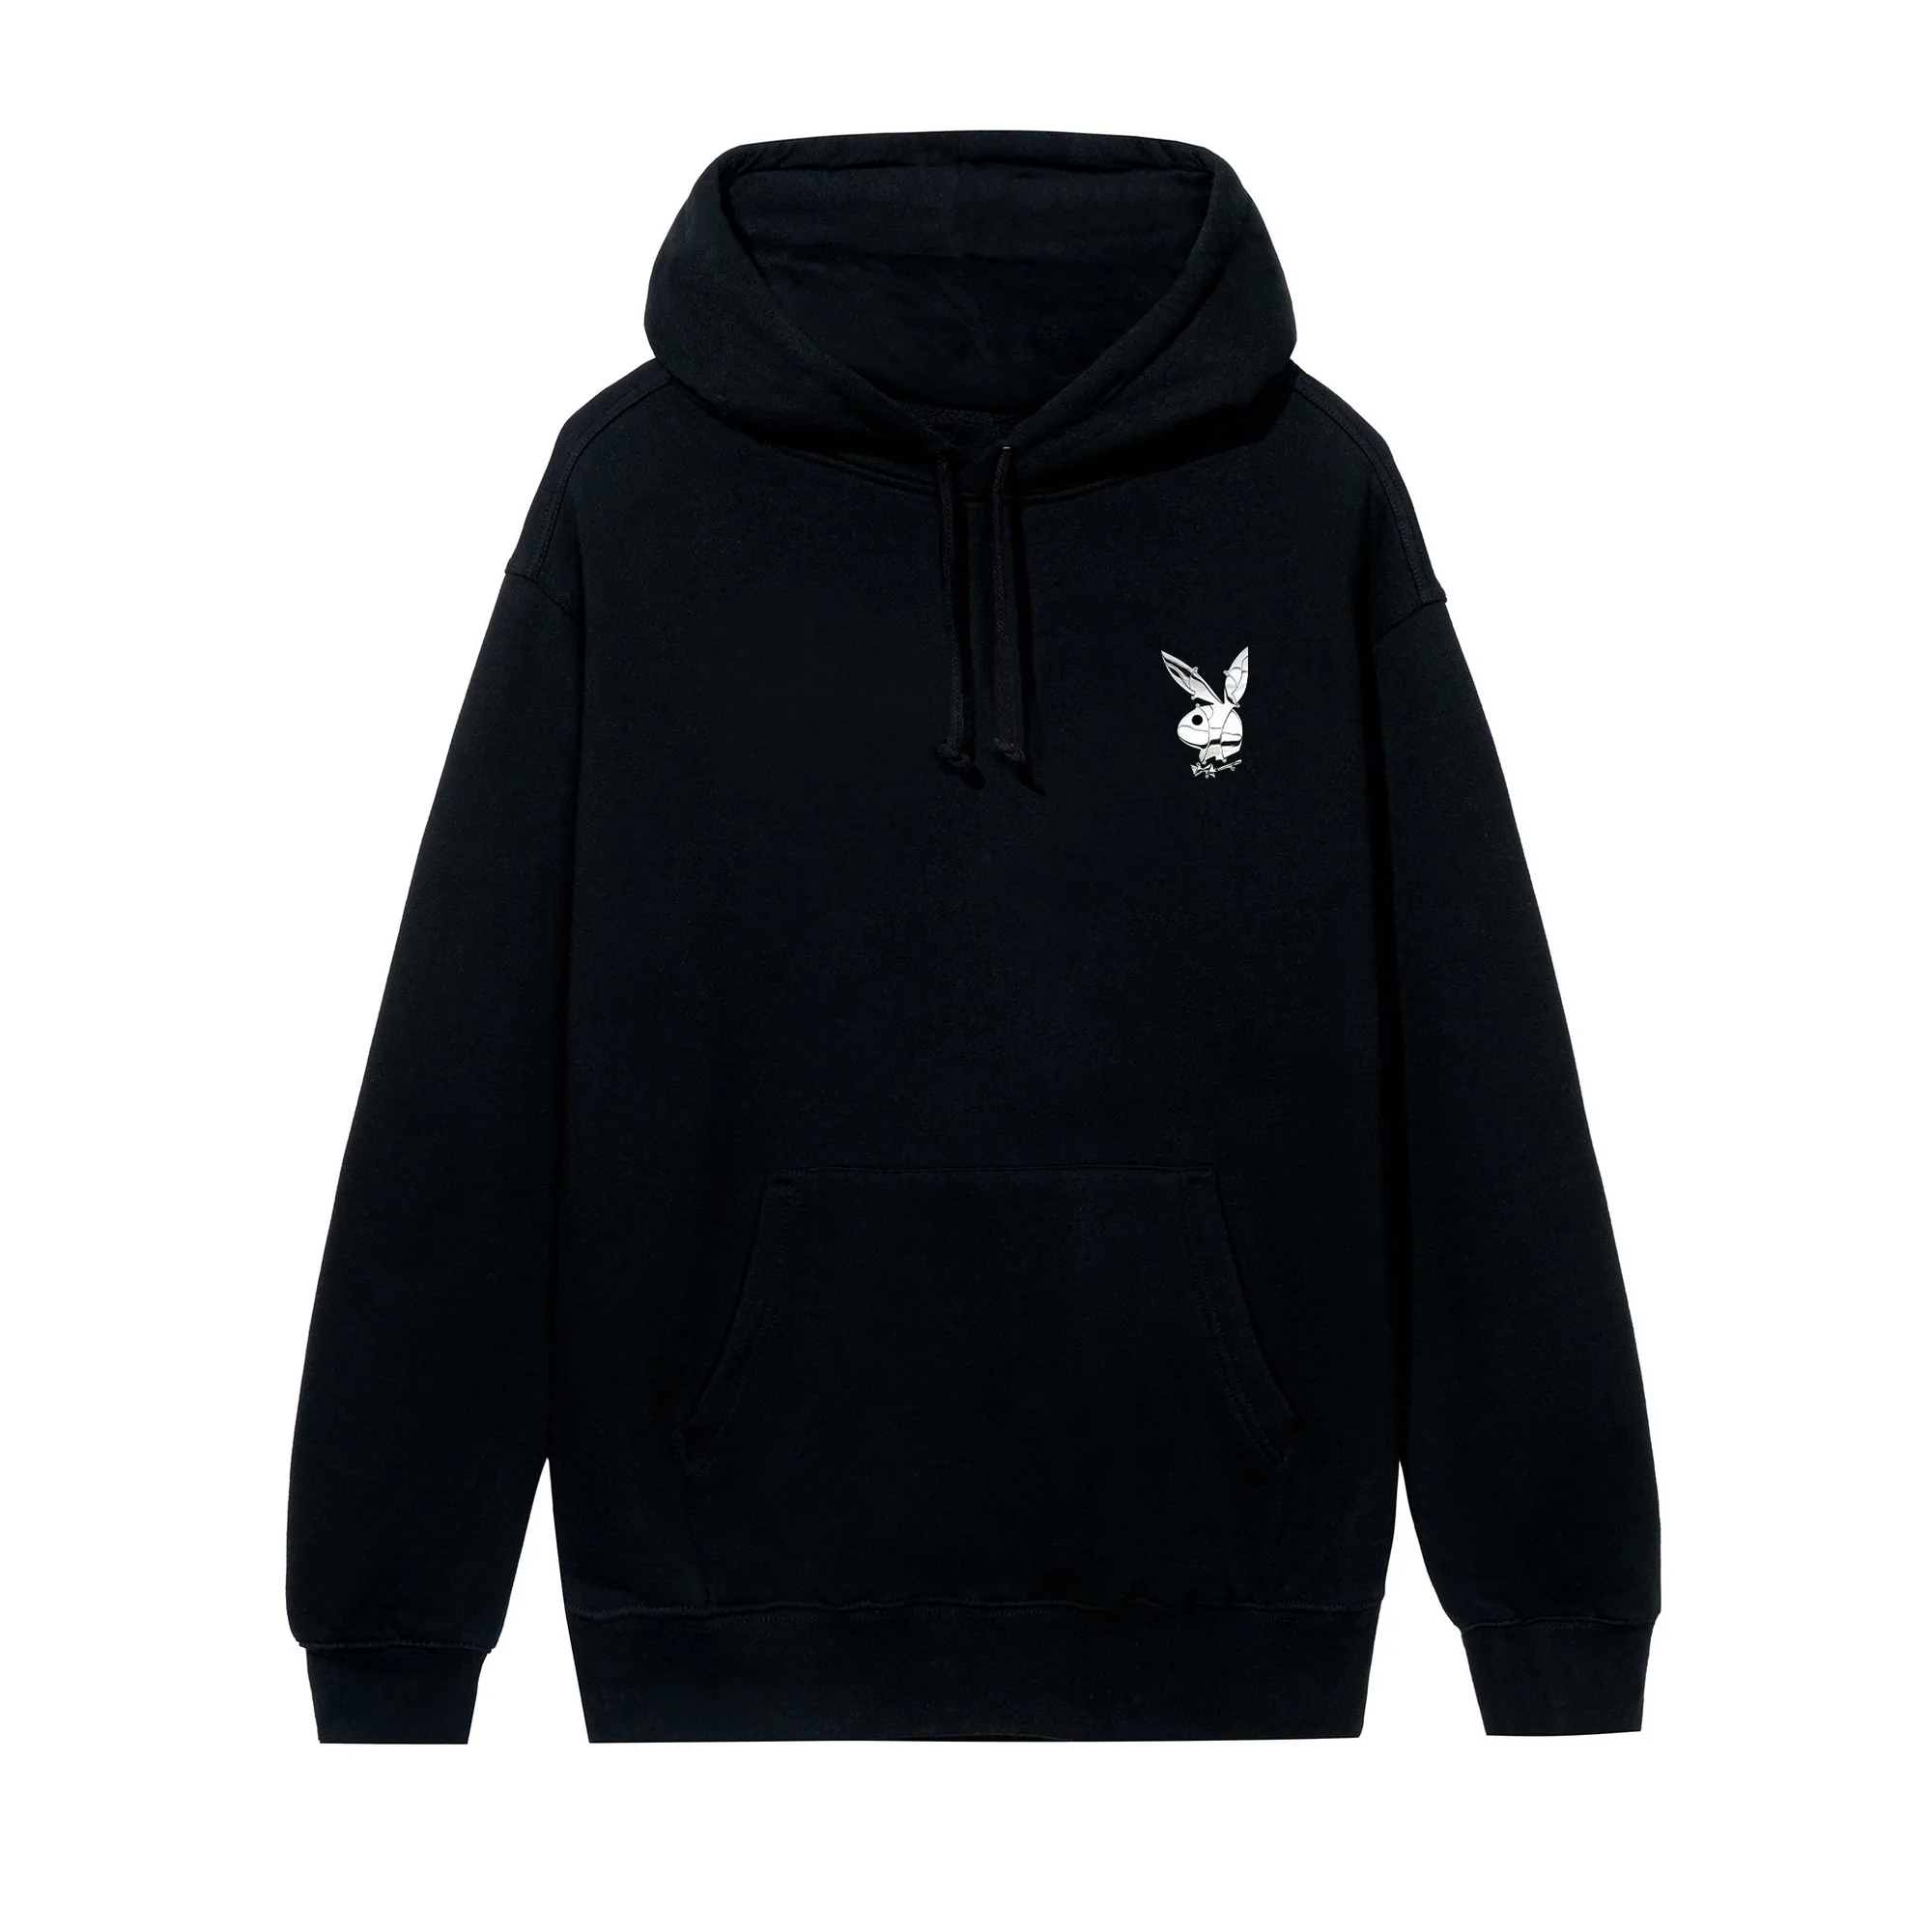 The Playboy Hoodie: A Timeless Classic